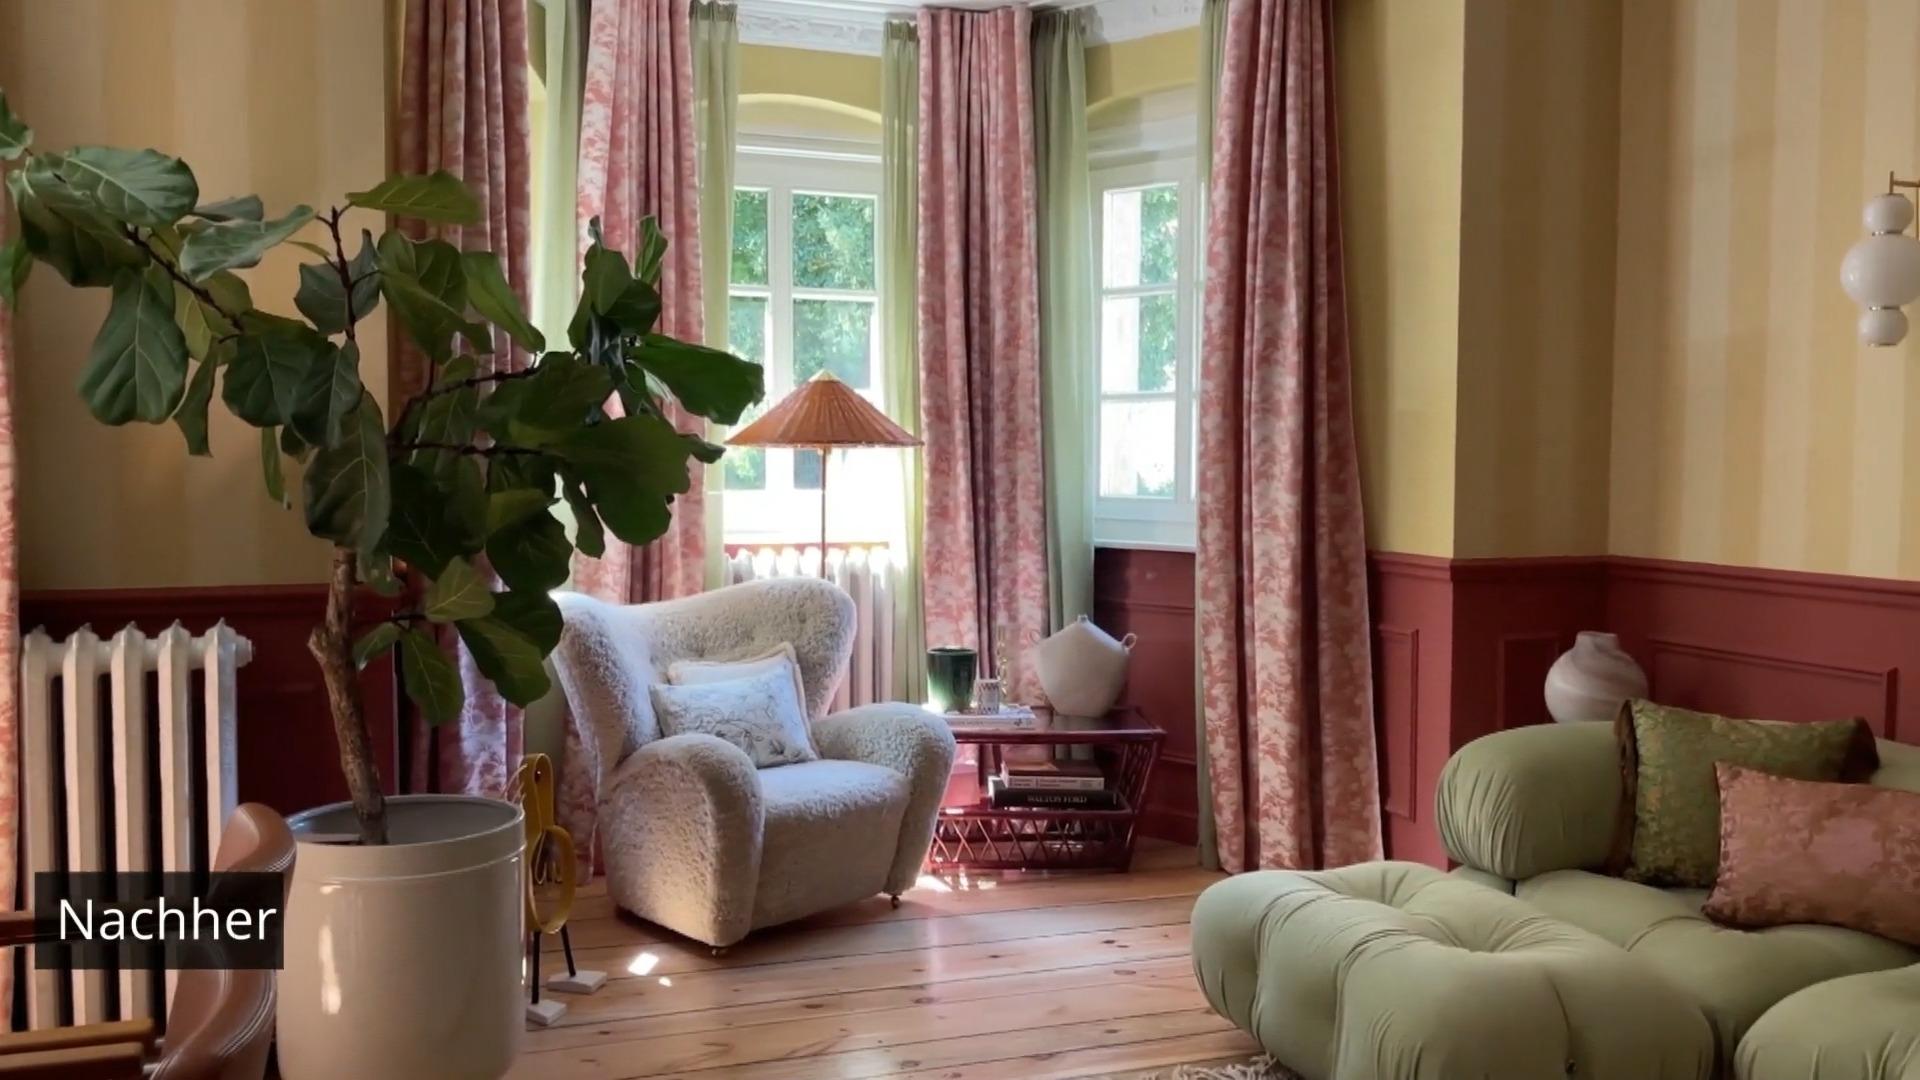 This Designer Is Remodeling a 1920s Apartment for Her Parents, Brilliant!